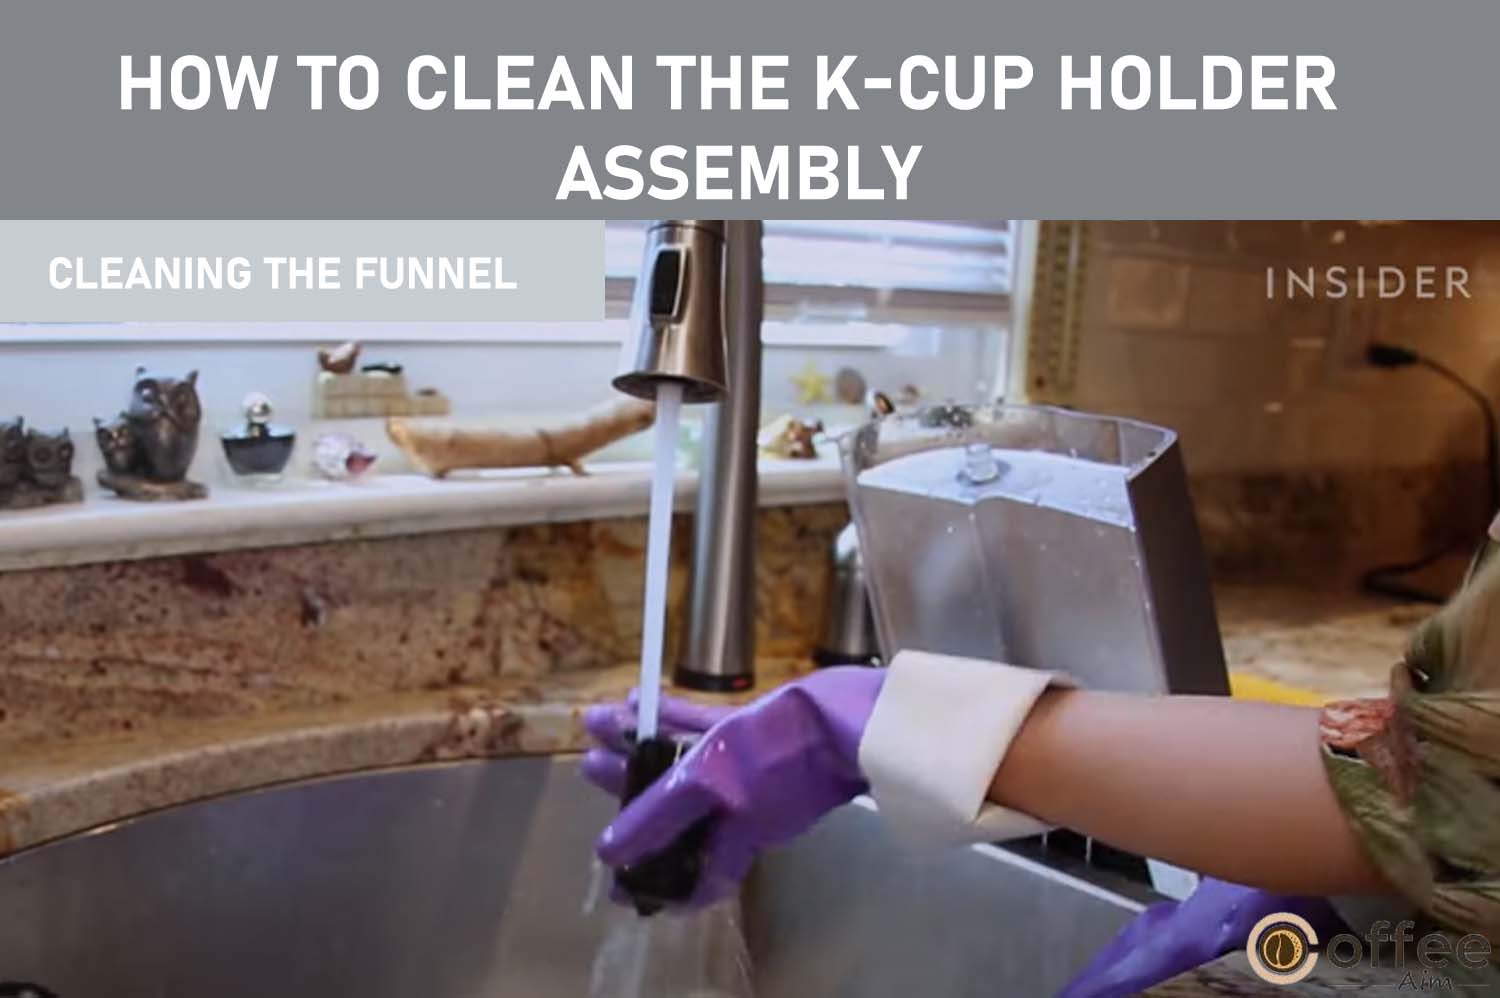 To clean the funnel, simply remove it from the K-Cup Holder by pulling until it pops off. After cleaning, snap it back onto the K-Cup Holder Assembly. It is dishwasher safe.